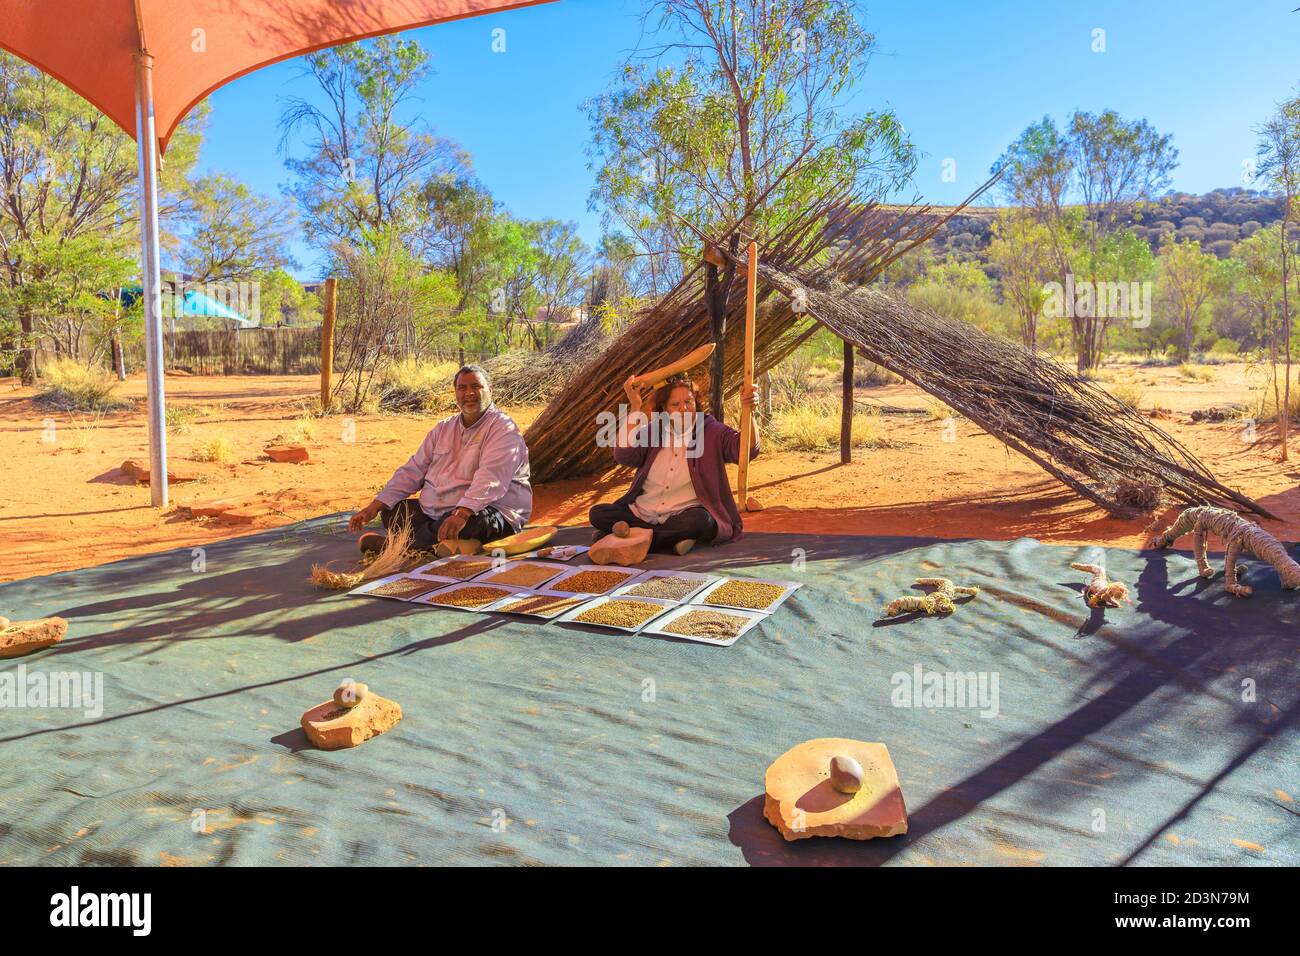 Kings Creek, Australia - Aug 21, 2019: experiencing the culture of Australian Aboriginal people showing the traditional bush seeds used for food and Stock Photo